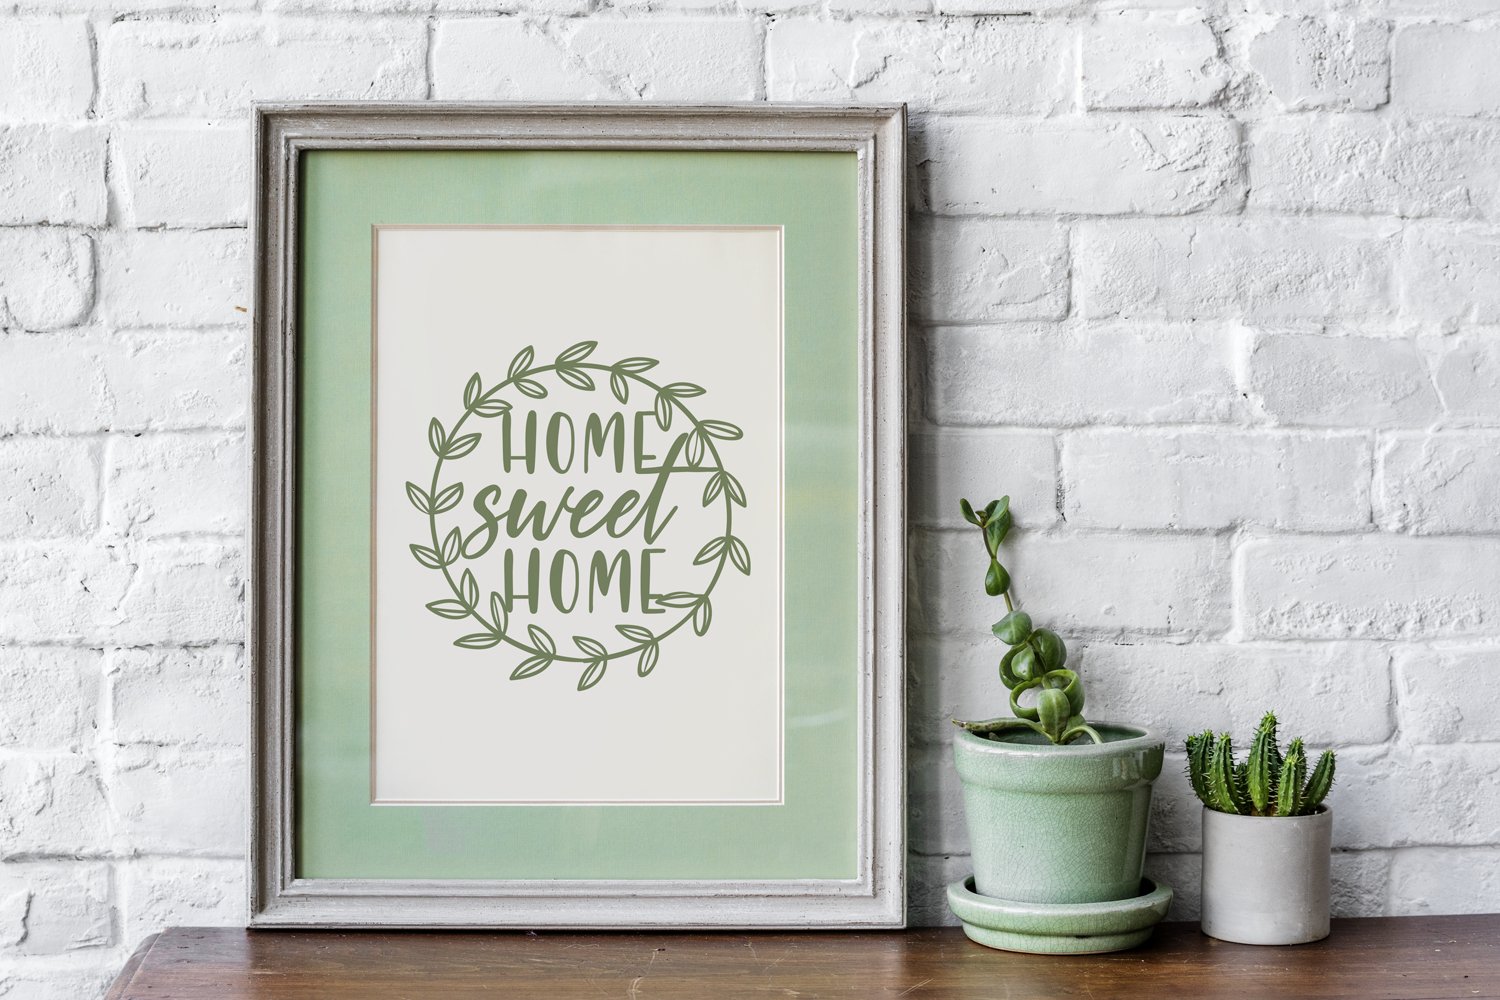 Mentol poster with wreath and quote.